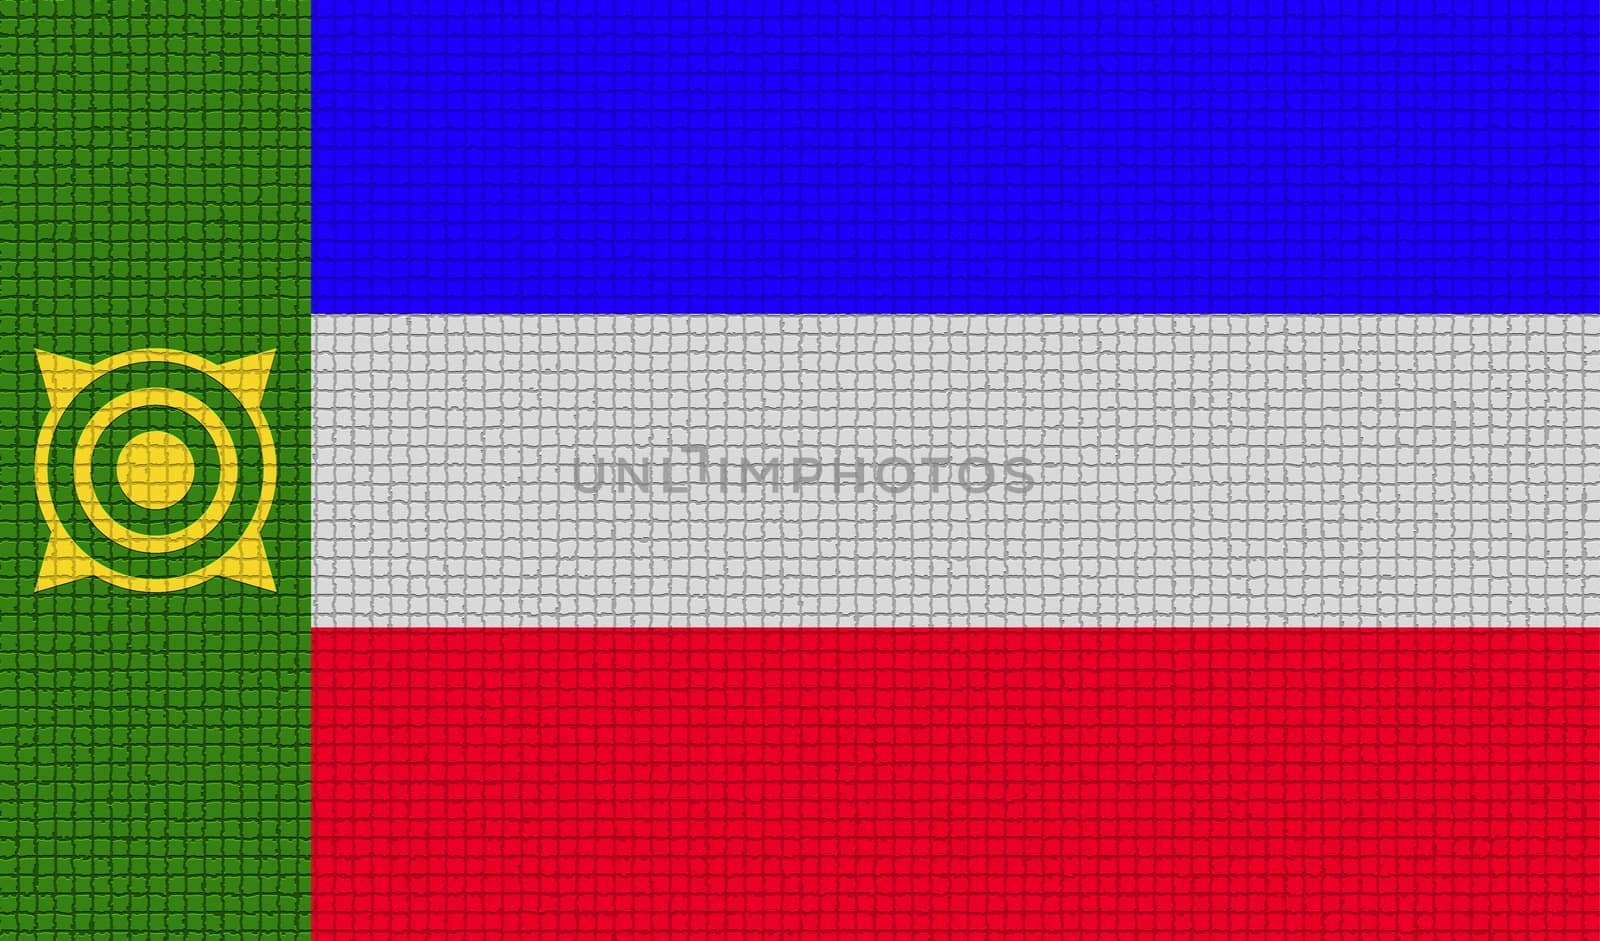 Flags of Khakassia with abstract textures. Rasterized version